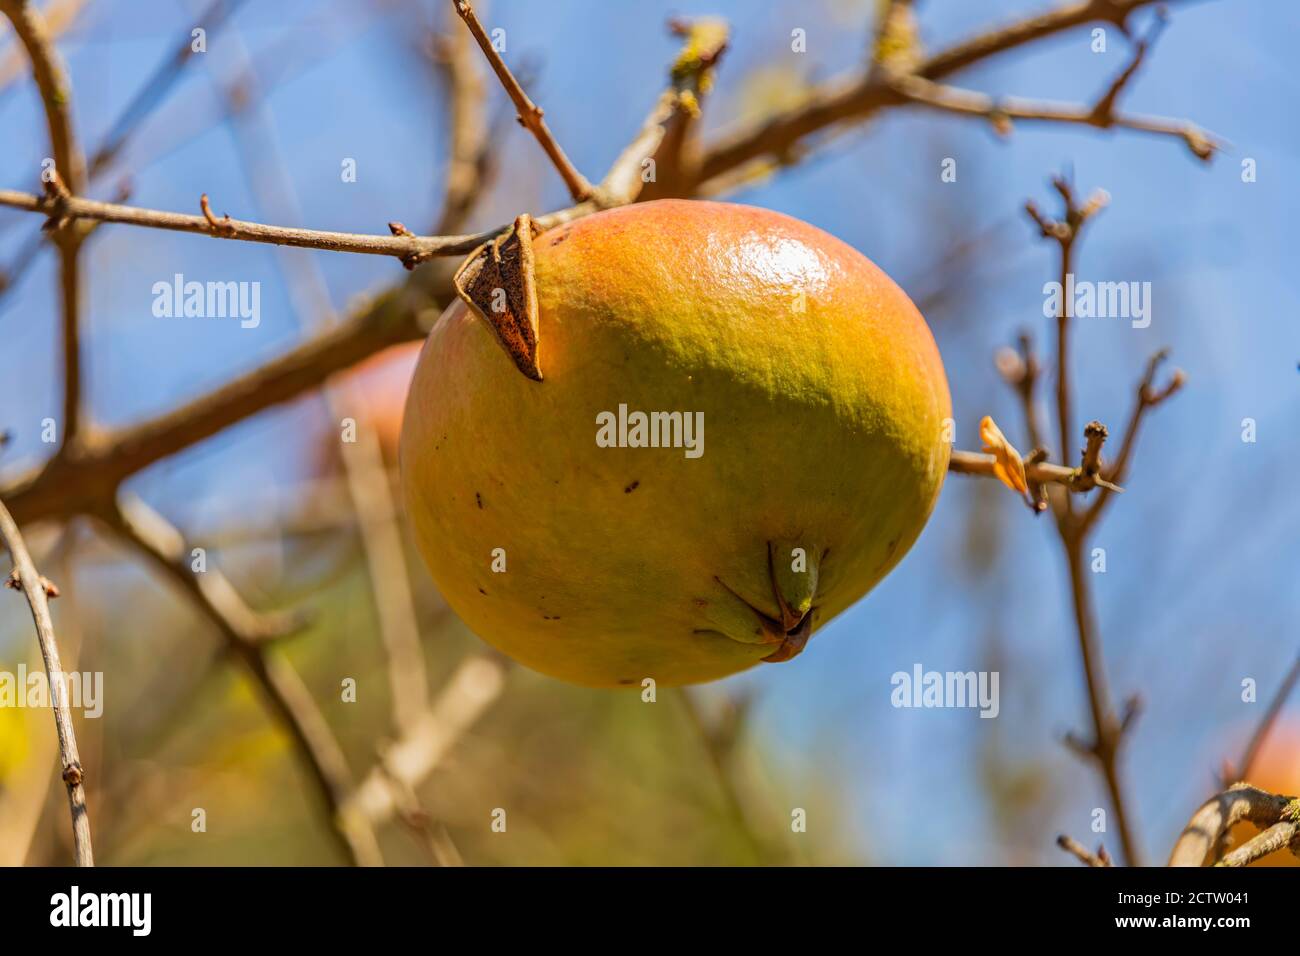 Ripening fruits of a pomegranate tree close up on a blured background Stock Photo